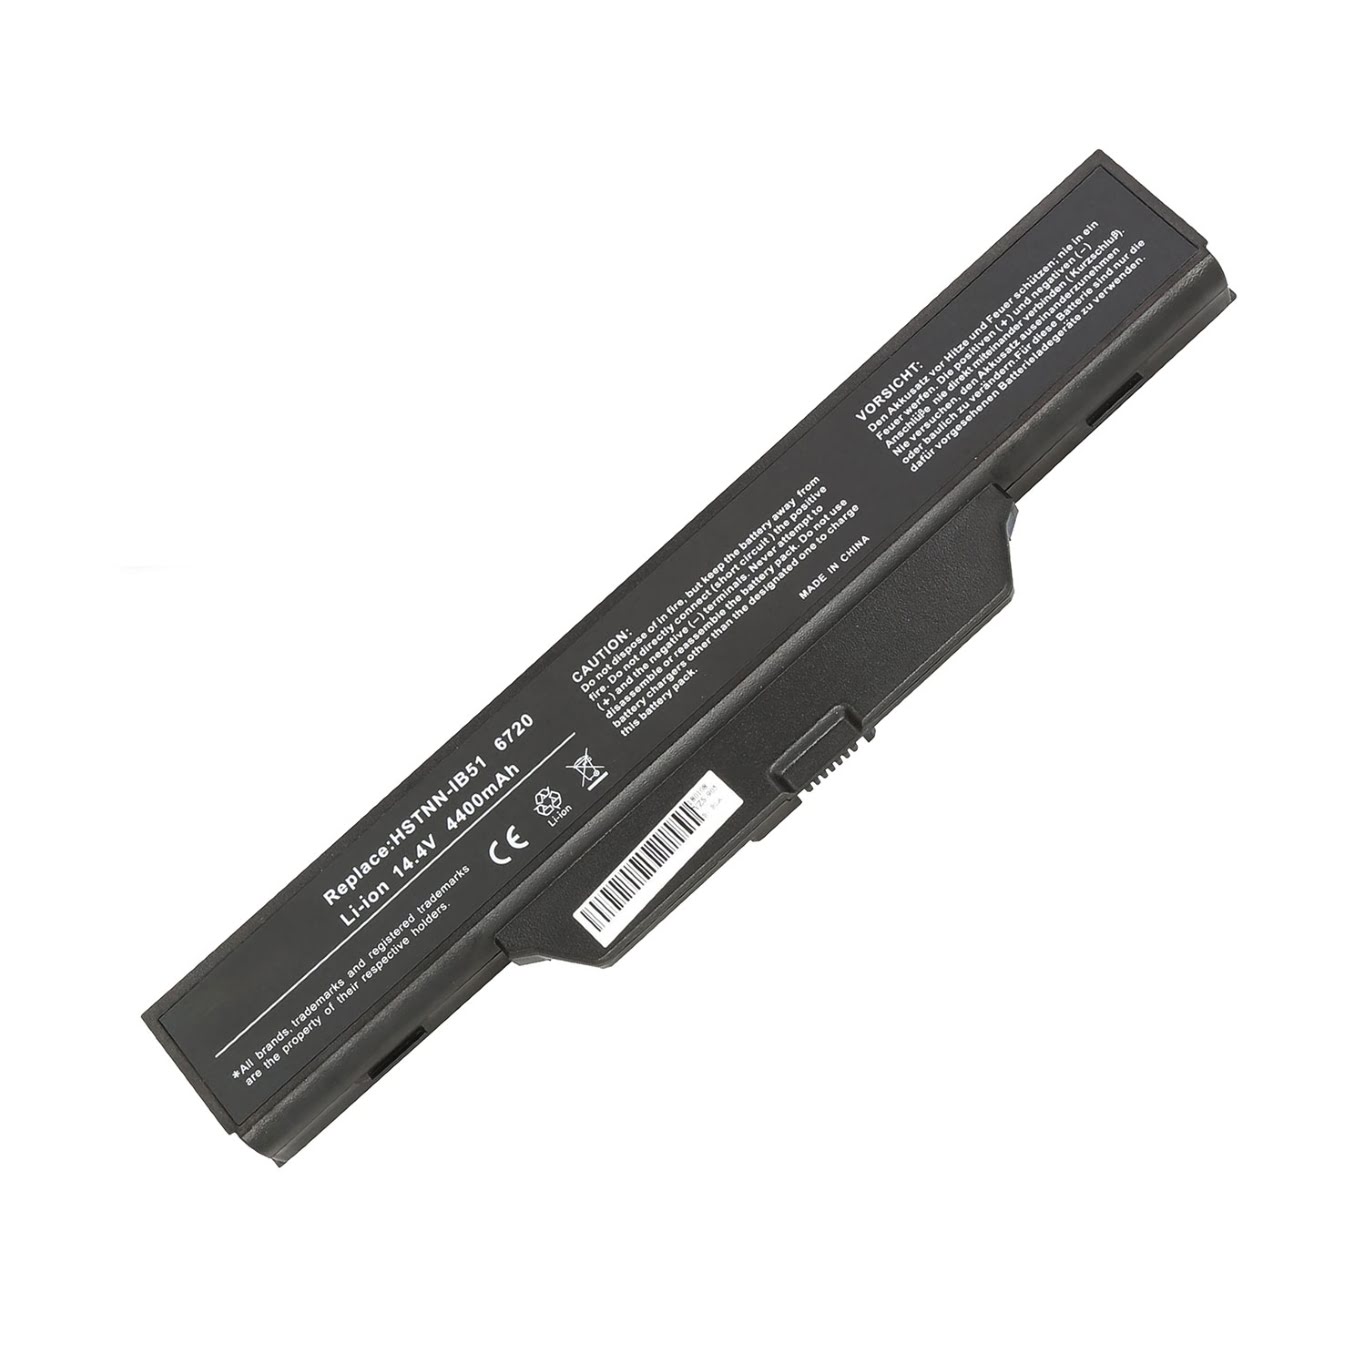 451085-121, 451085-141 replacement Laptop Battery for HP 550, 8 cells, 14.4V, 4400mAh